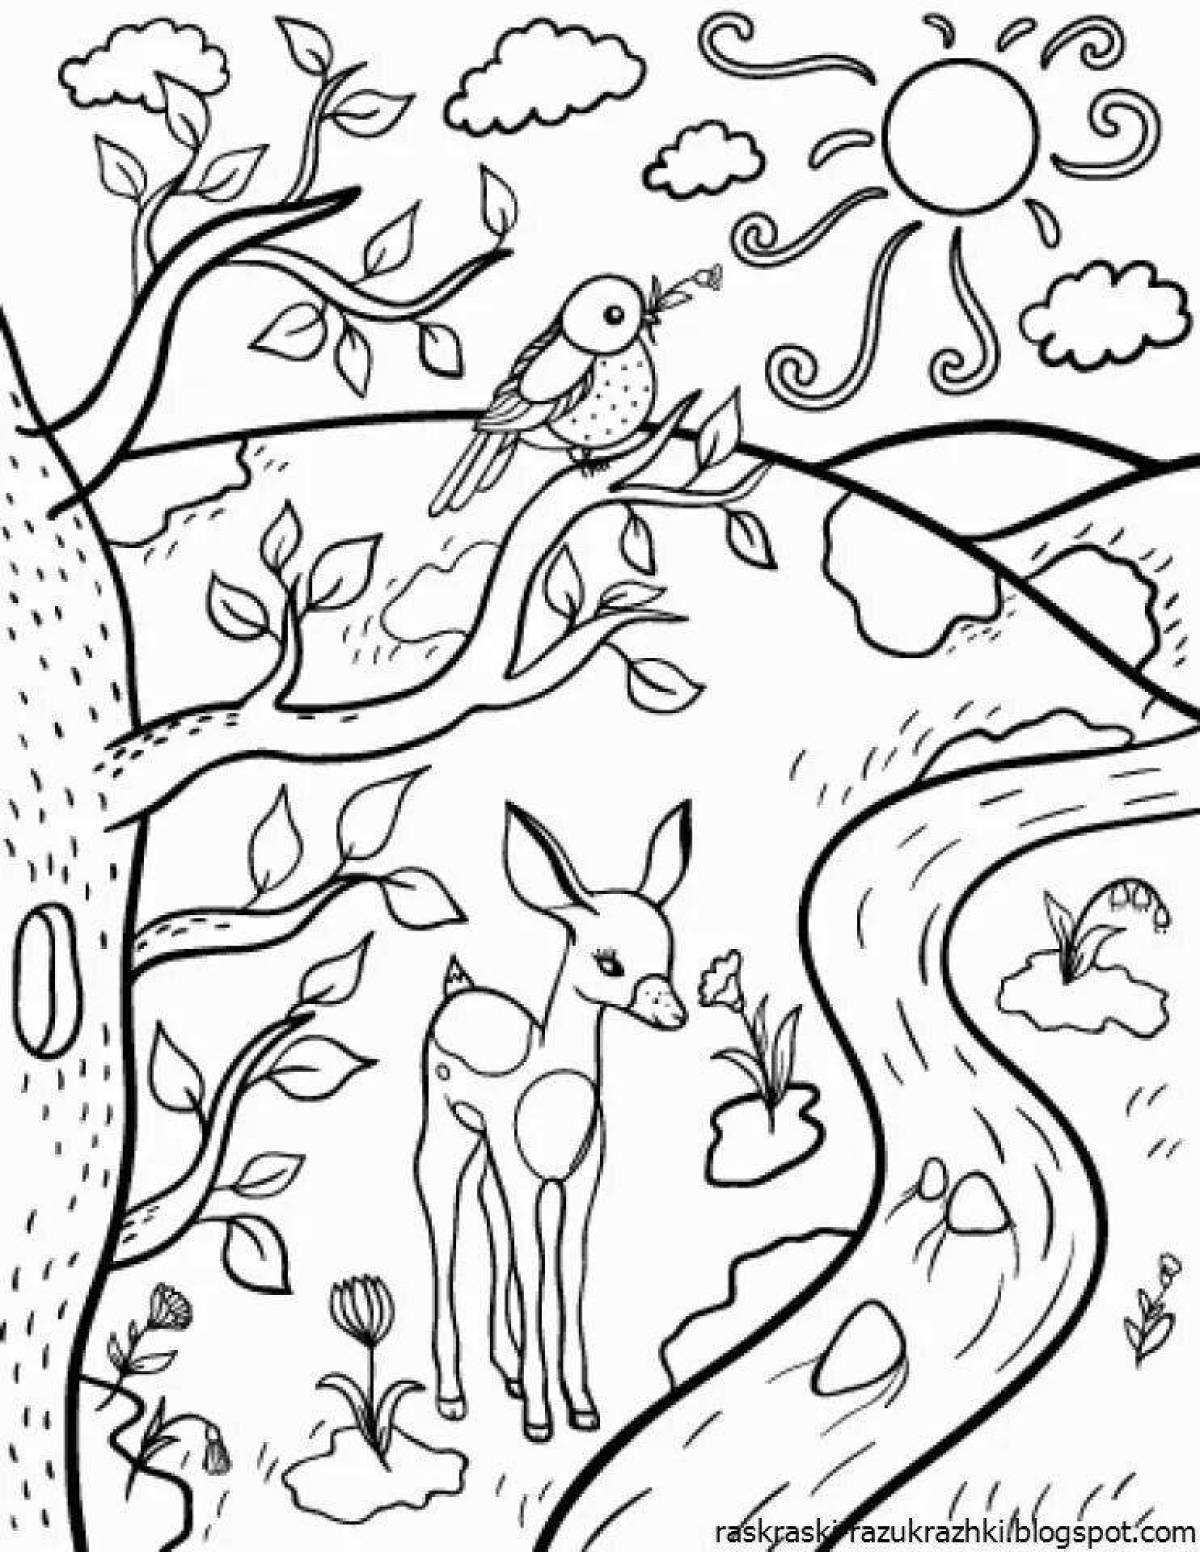 Luxury nature coloring book for children 6-7 years old